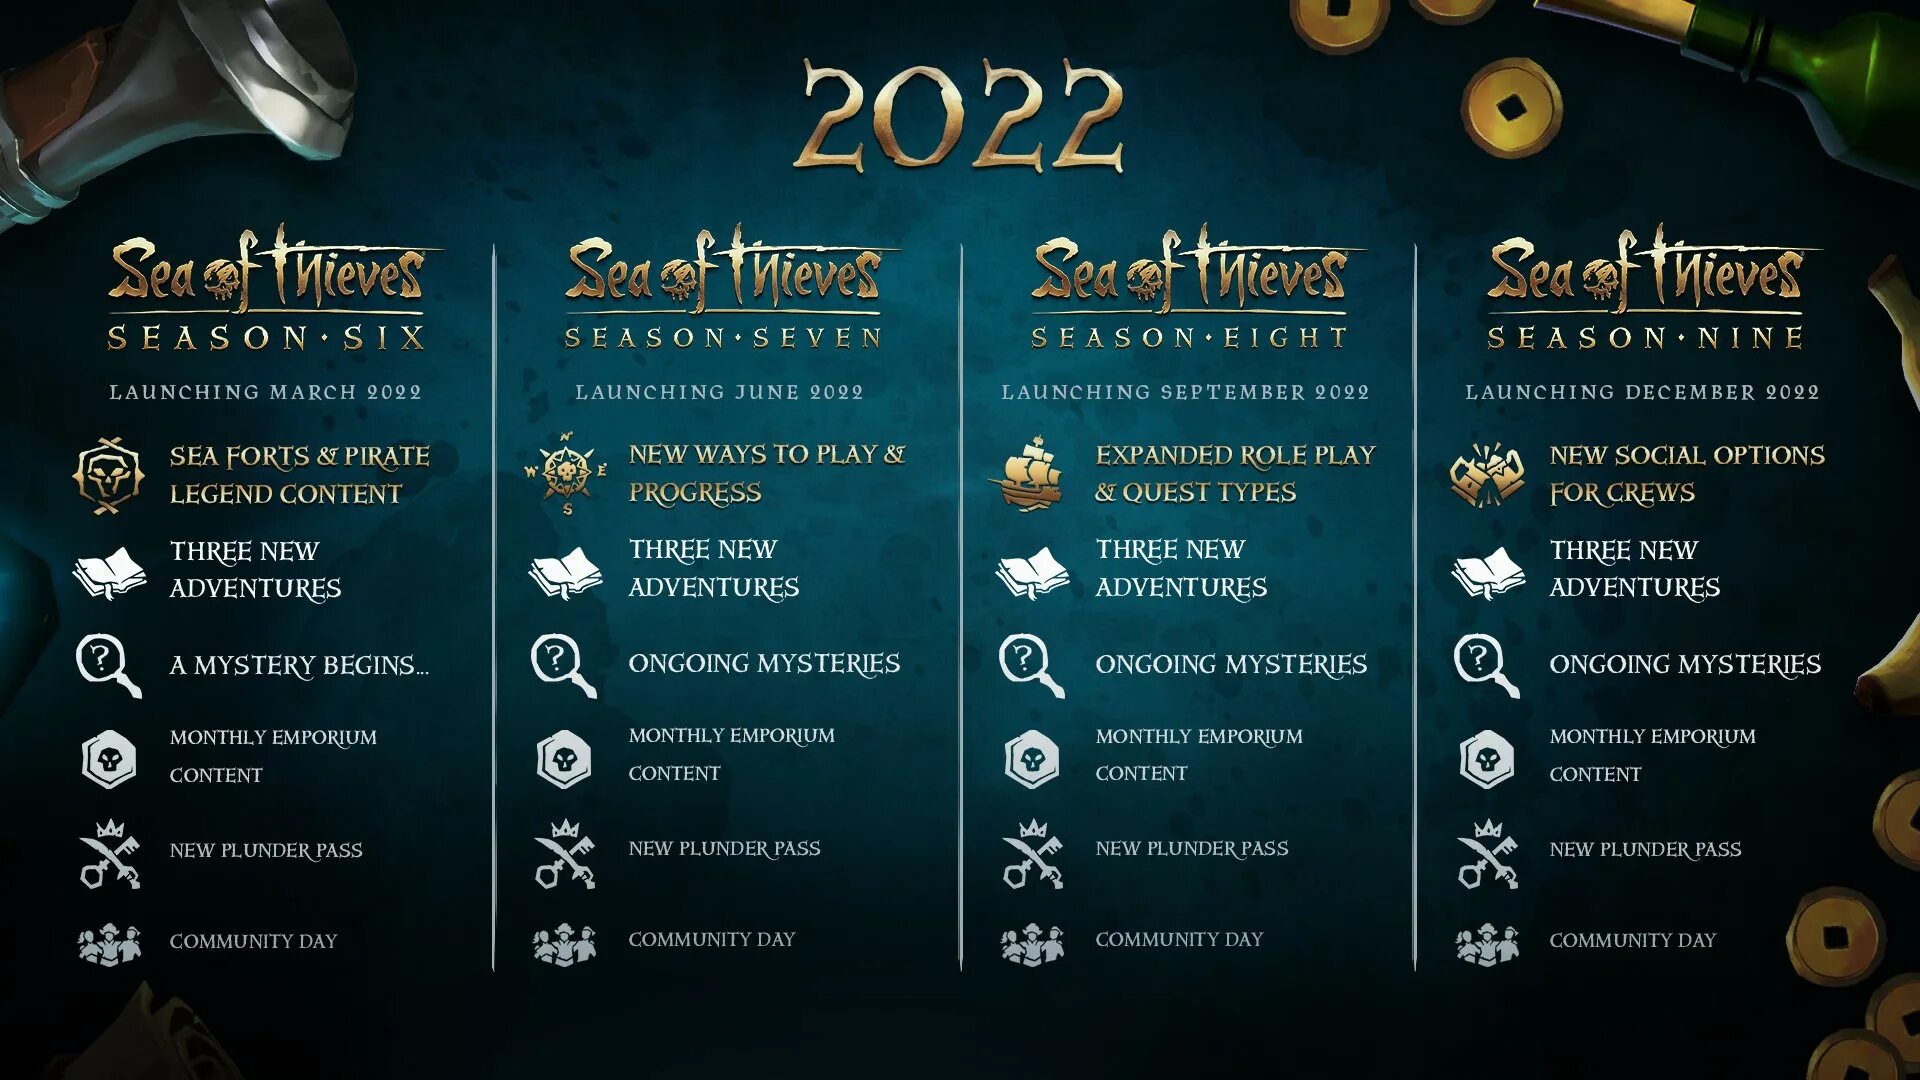 2022 Sea of Thieves Road Map. Sea of Thieves Roadmap 2022. Sea of Thieves 2022.